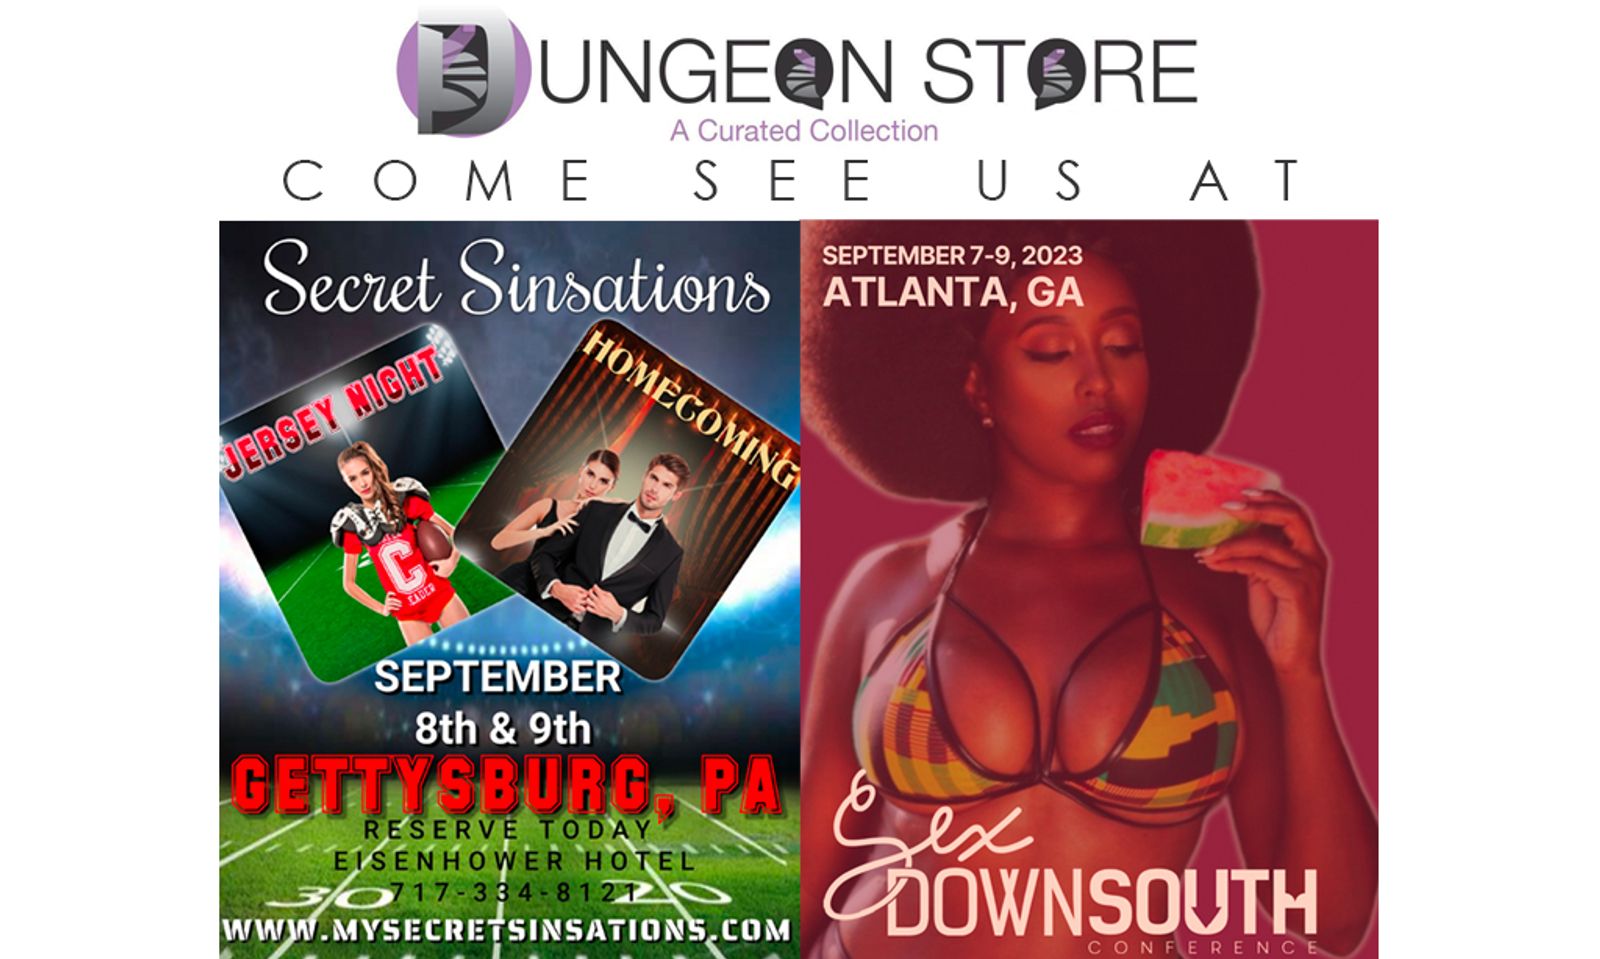 The Dungeon Store to Show at Secret Sinsations and Sex Down South